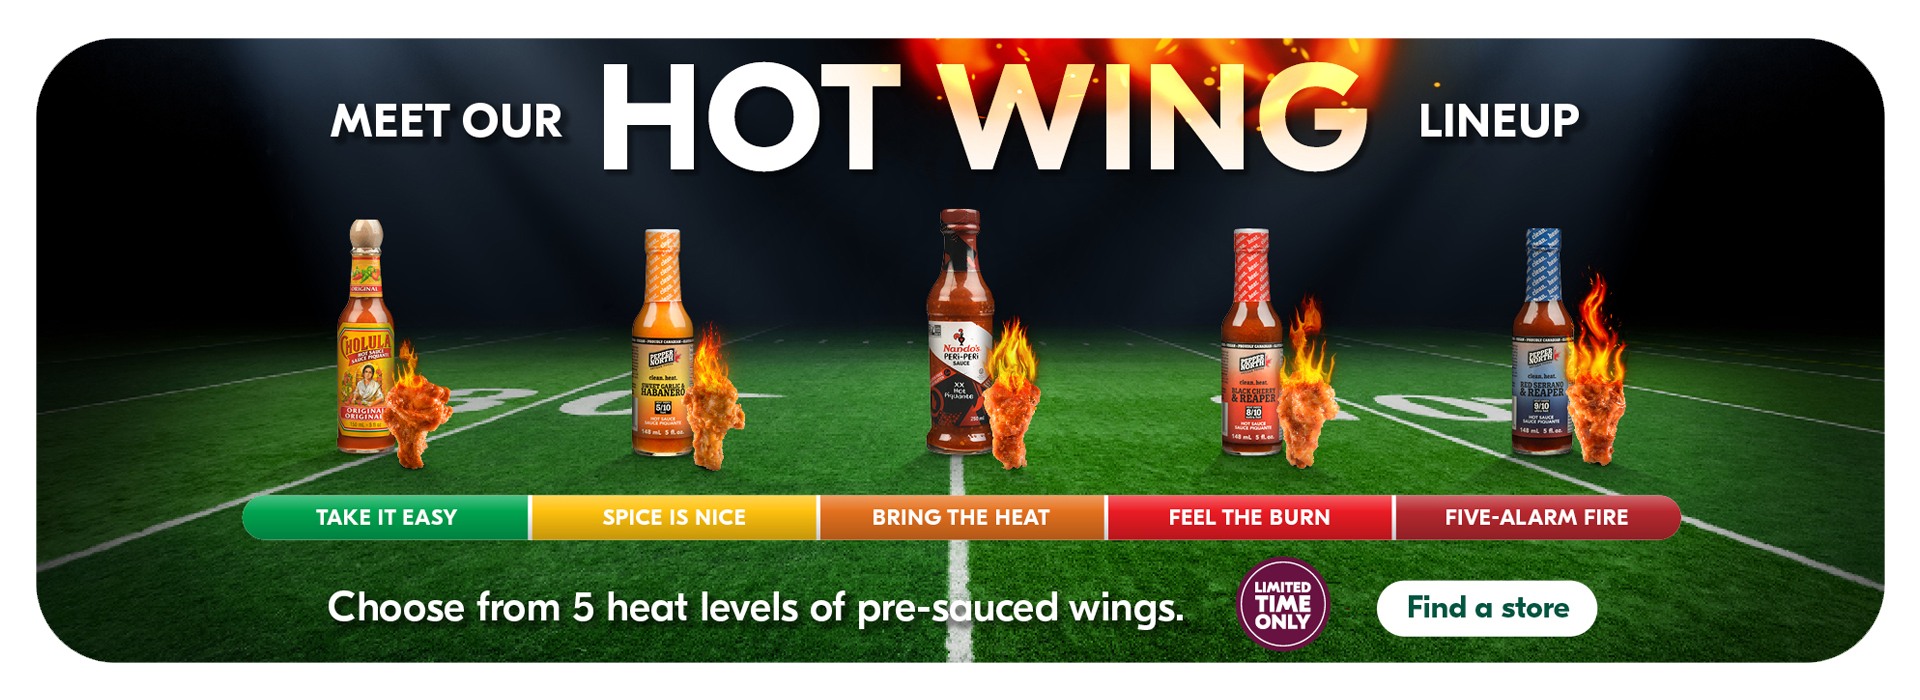 Text Reading 'Meet our Hot Wing Lineup and choose from 5 heat levels of pre-sauced wings. This offer is only available for a limited time. "Find a store" from the button given below.'